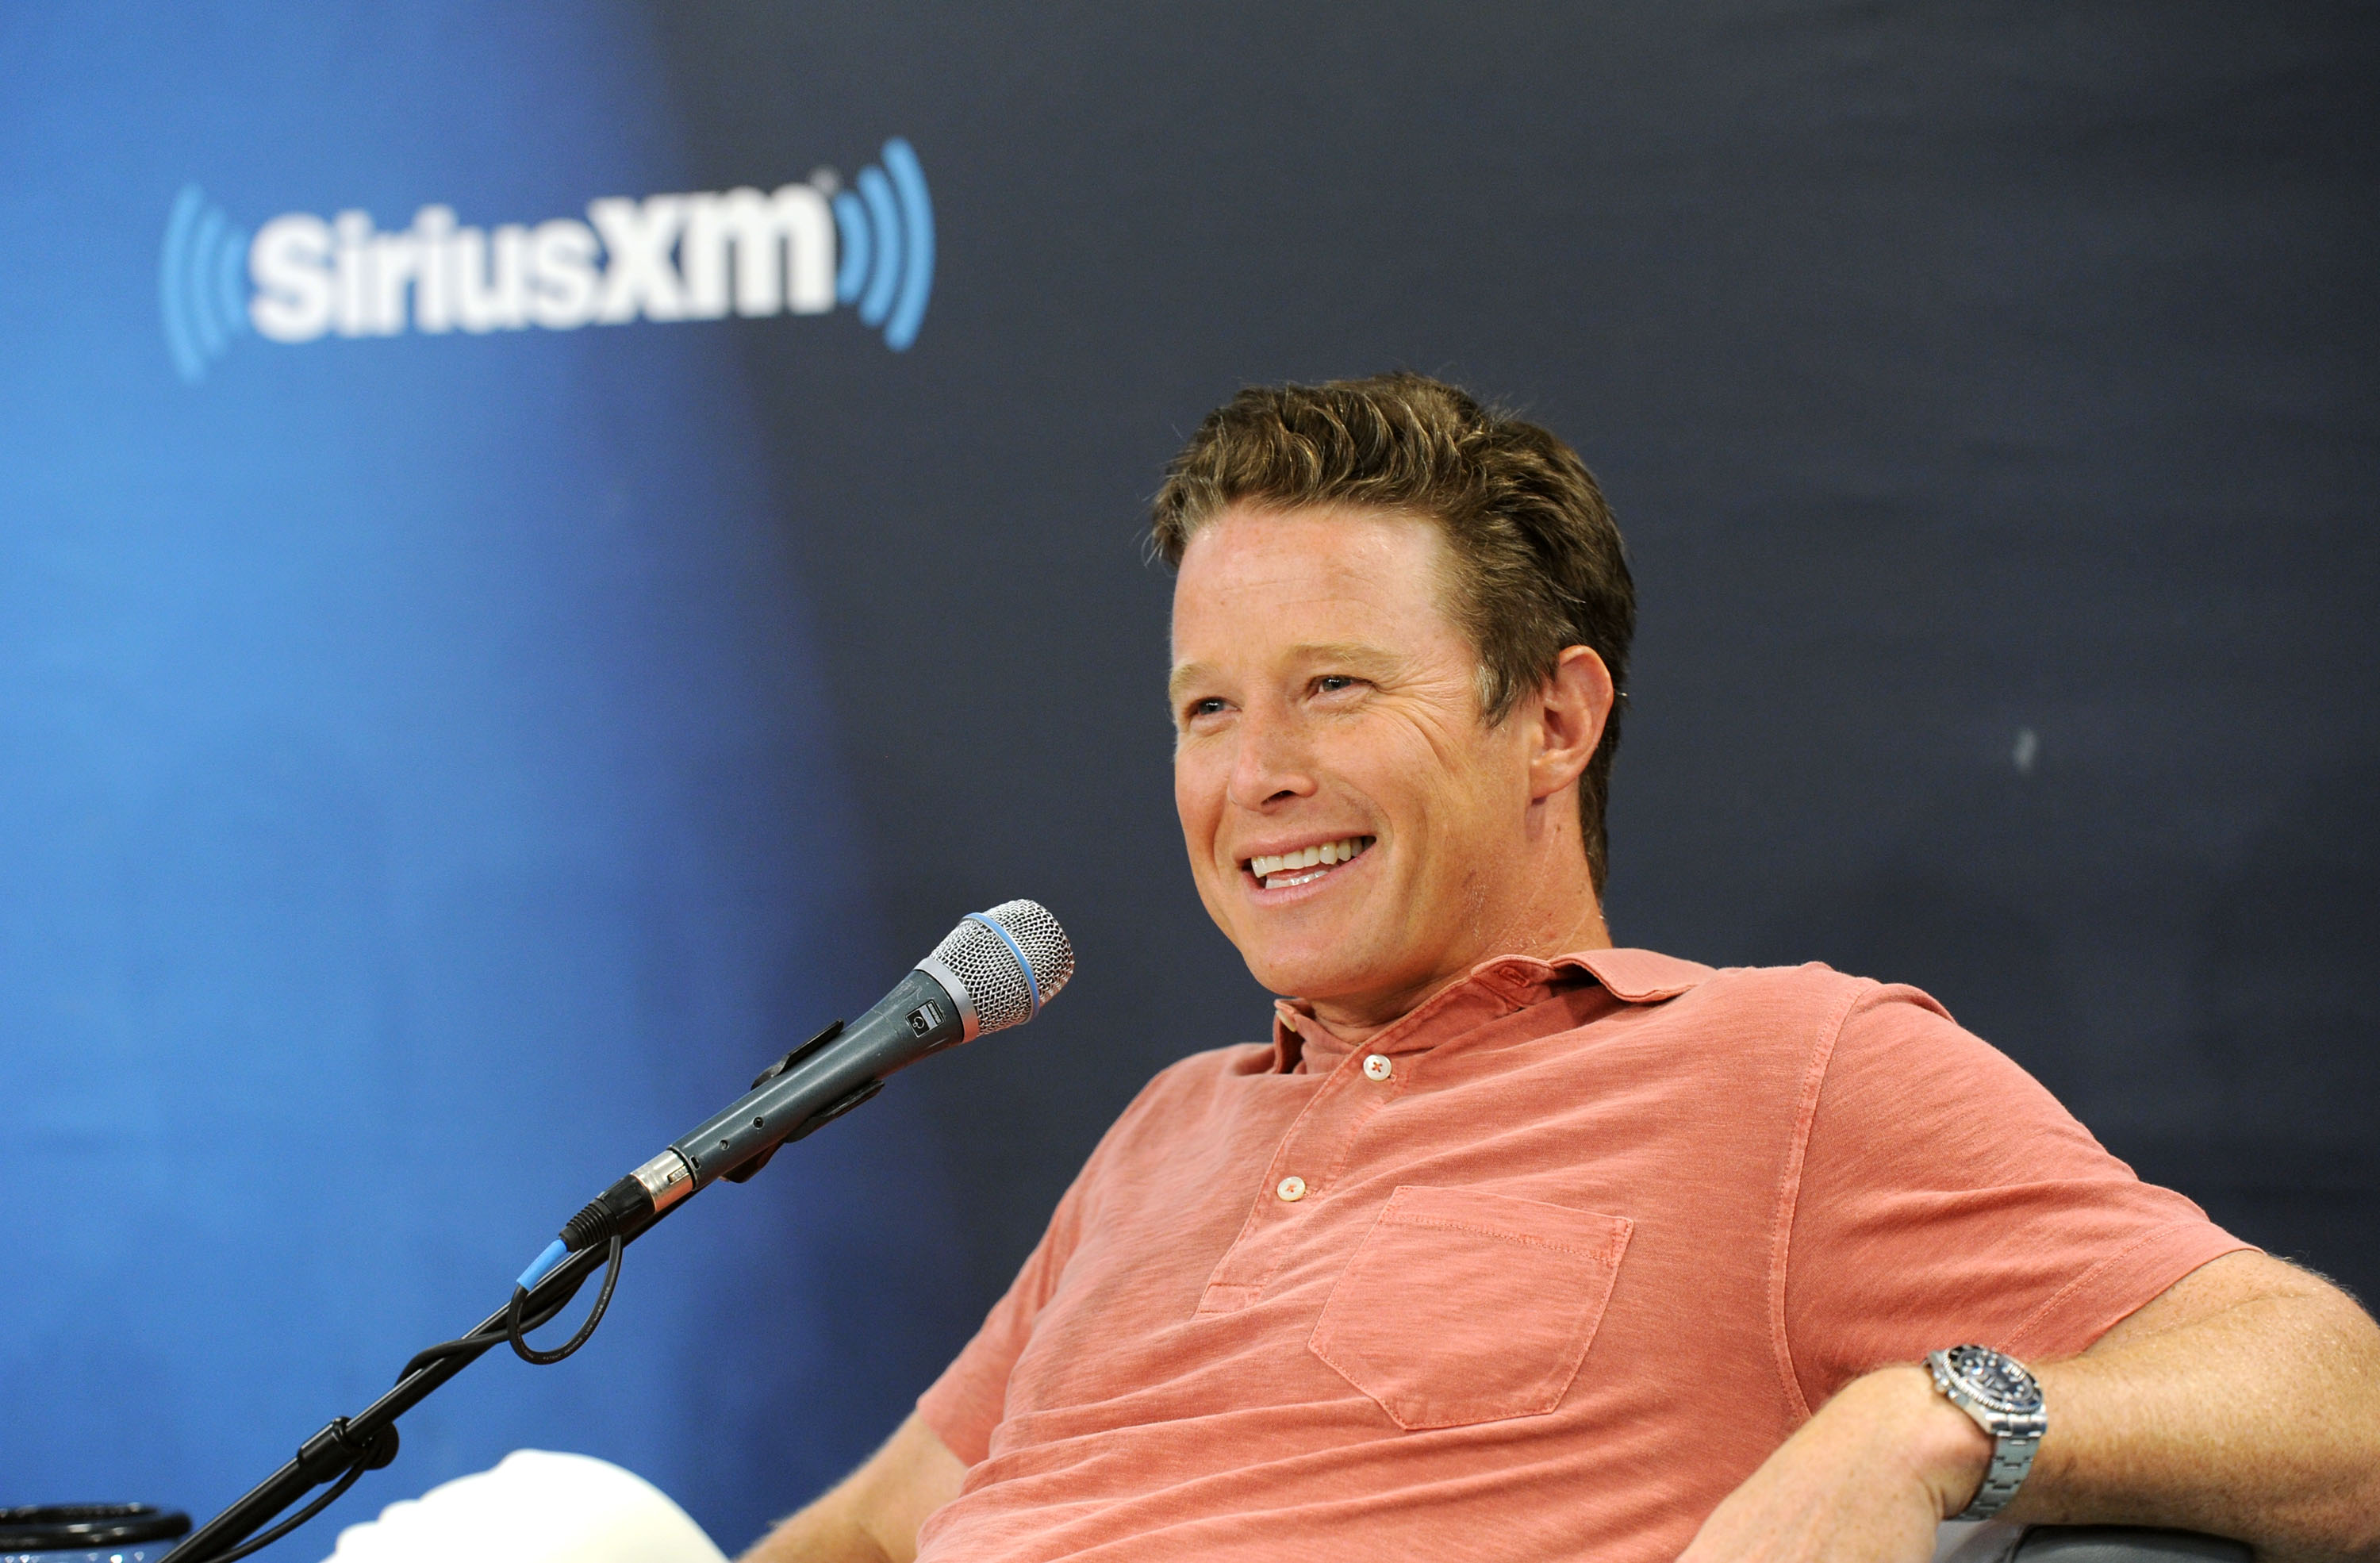 NBC News' Billy Bush And Jeff Rossen In Conversation For SiriusXM's TODAY Show Radio